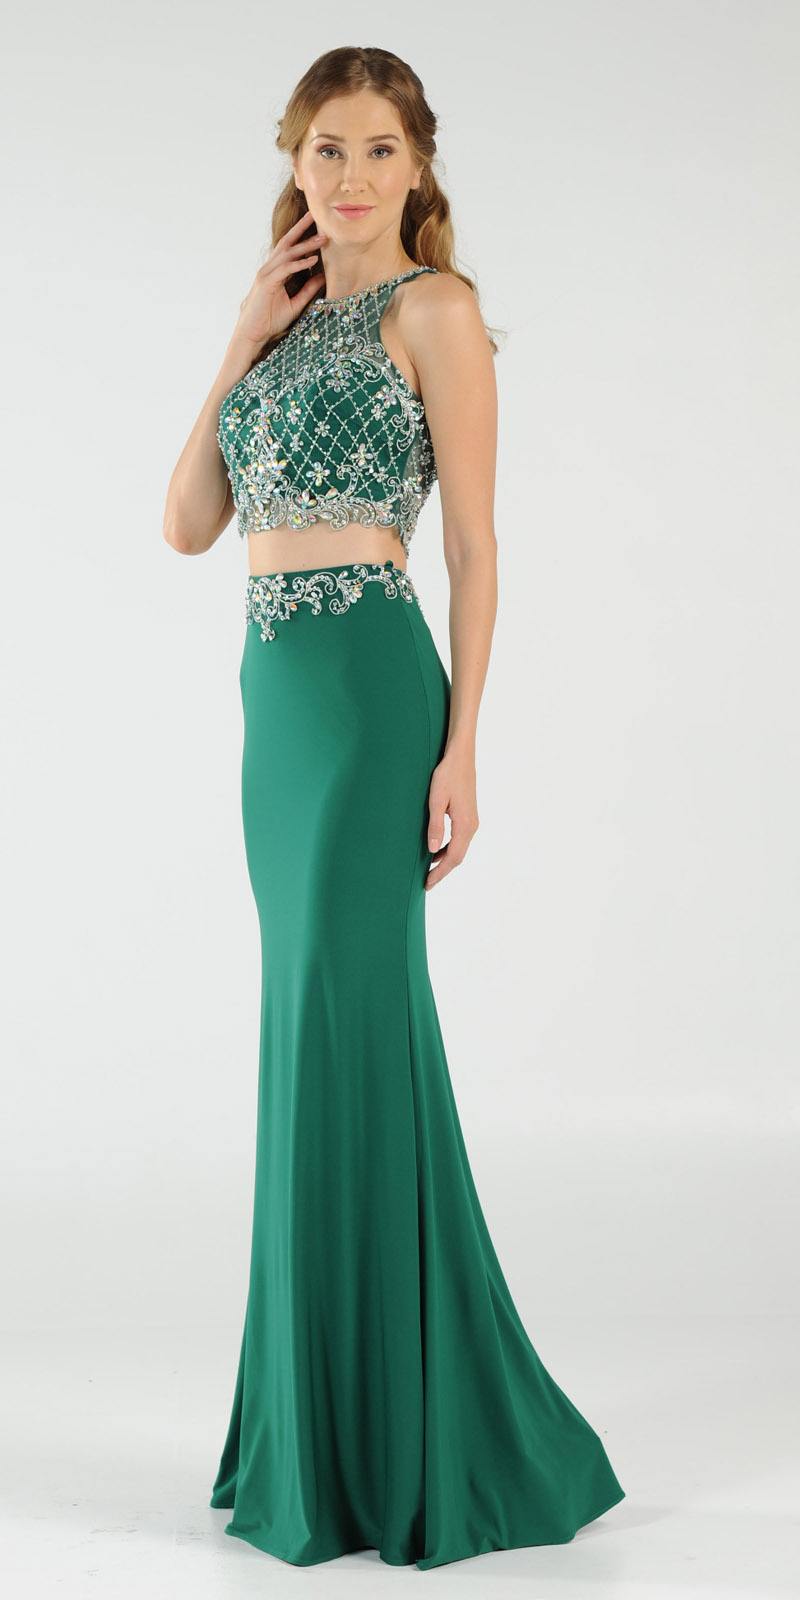 Poly USA 7926 Two-Piece Green Prom Gown with Embellished Crop Top and ITY Skirt Side View